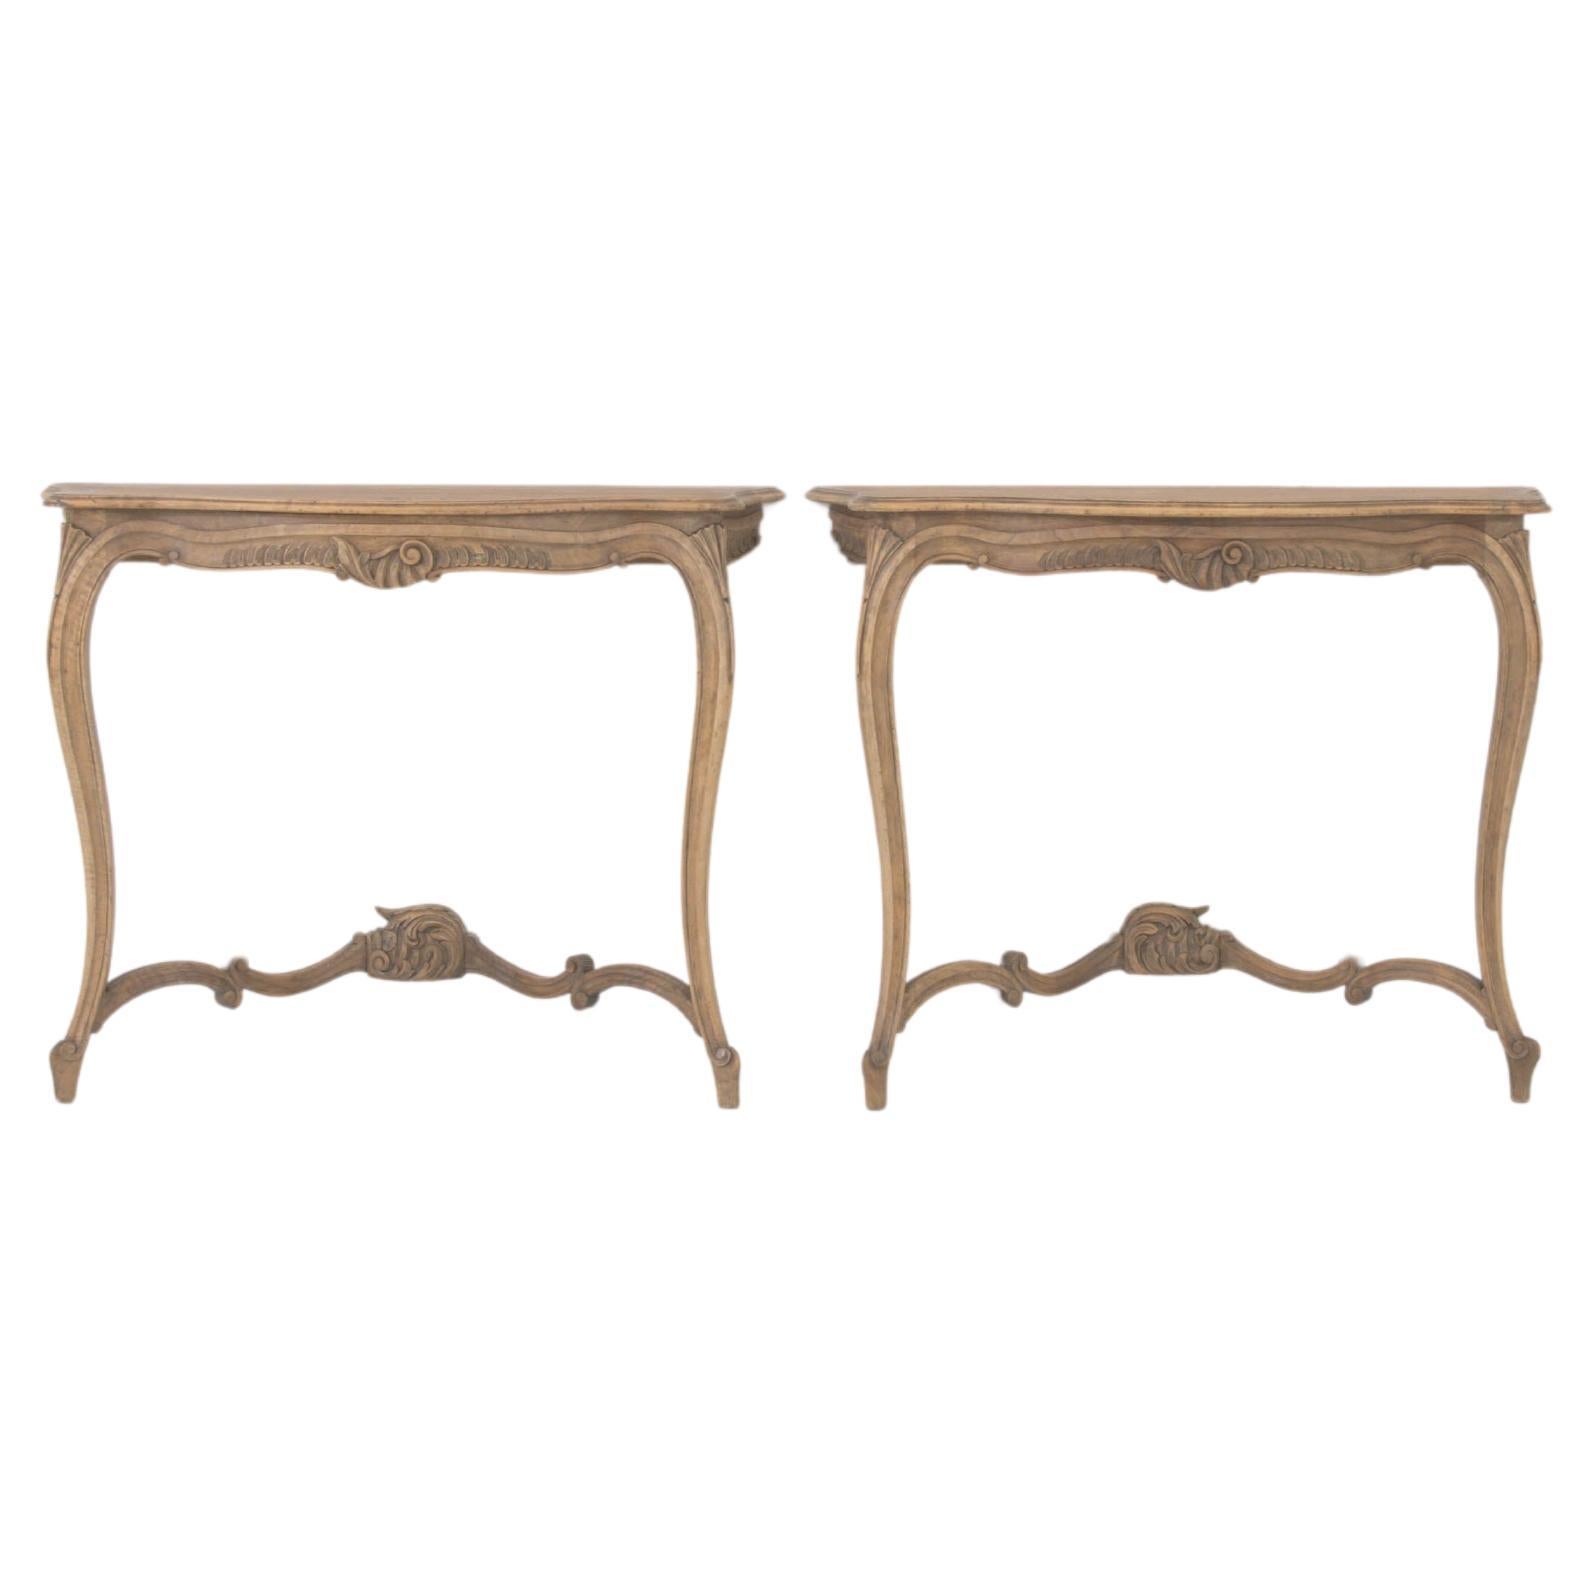 1900s French Wooden Console Tables, a Pair For Sale